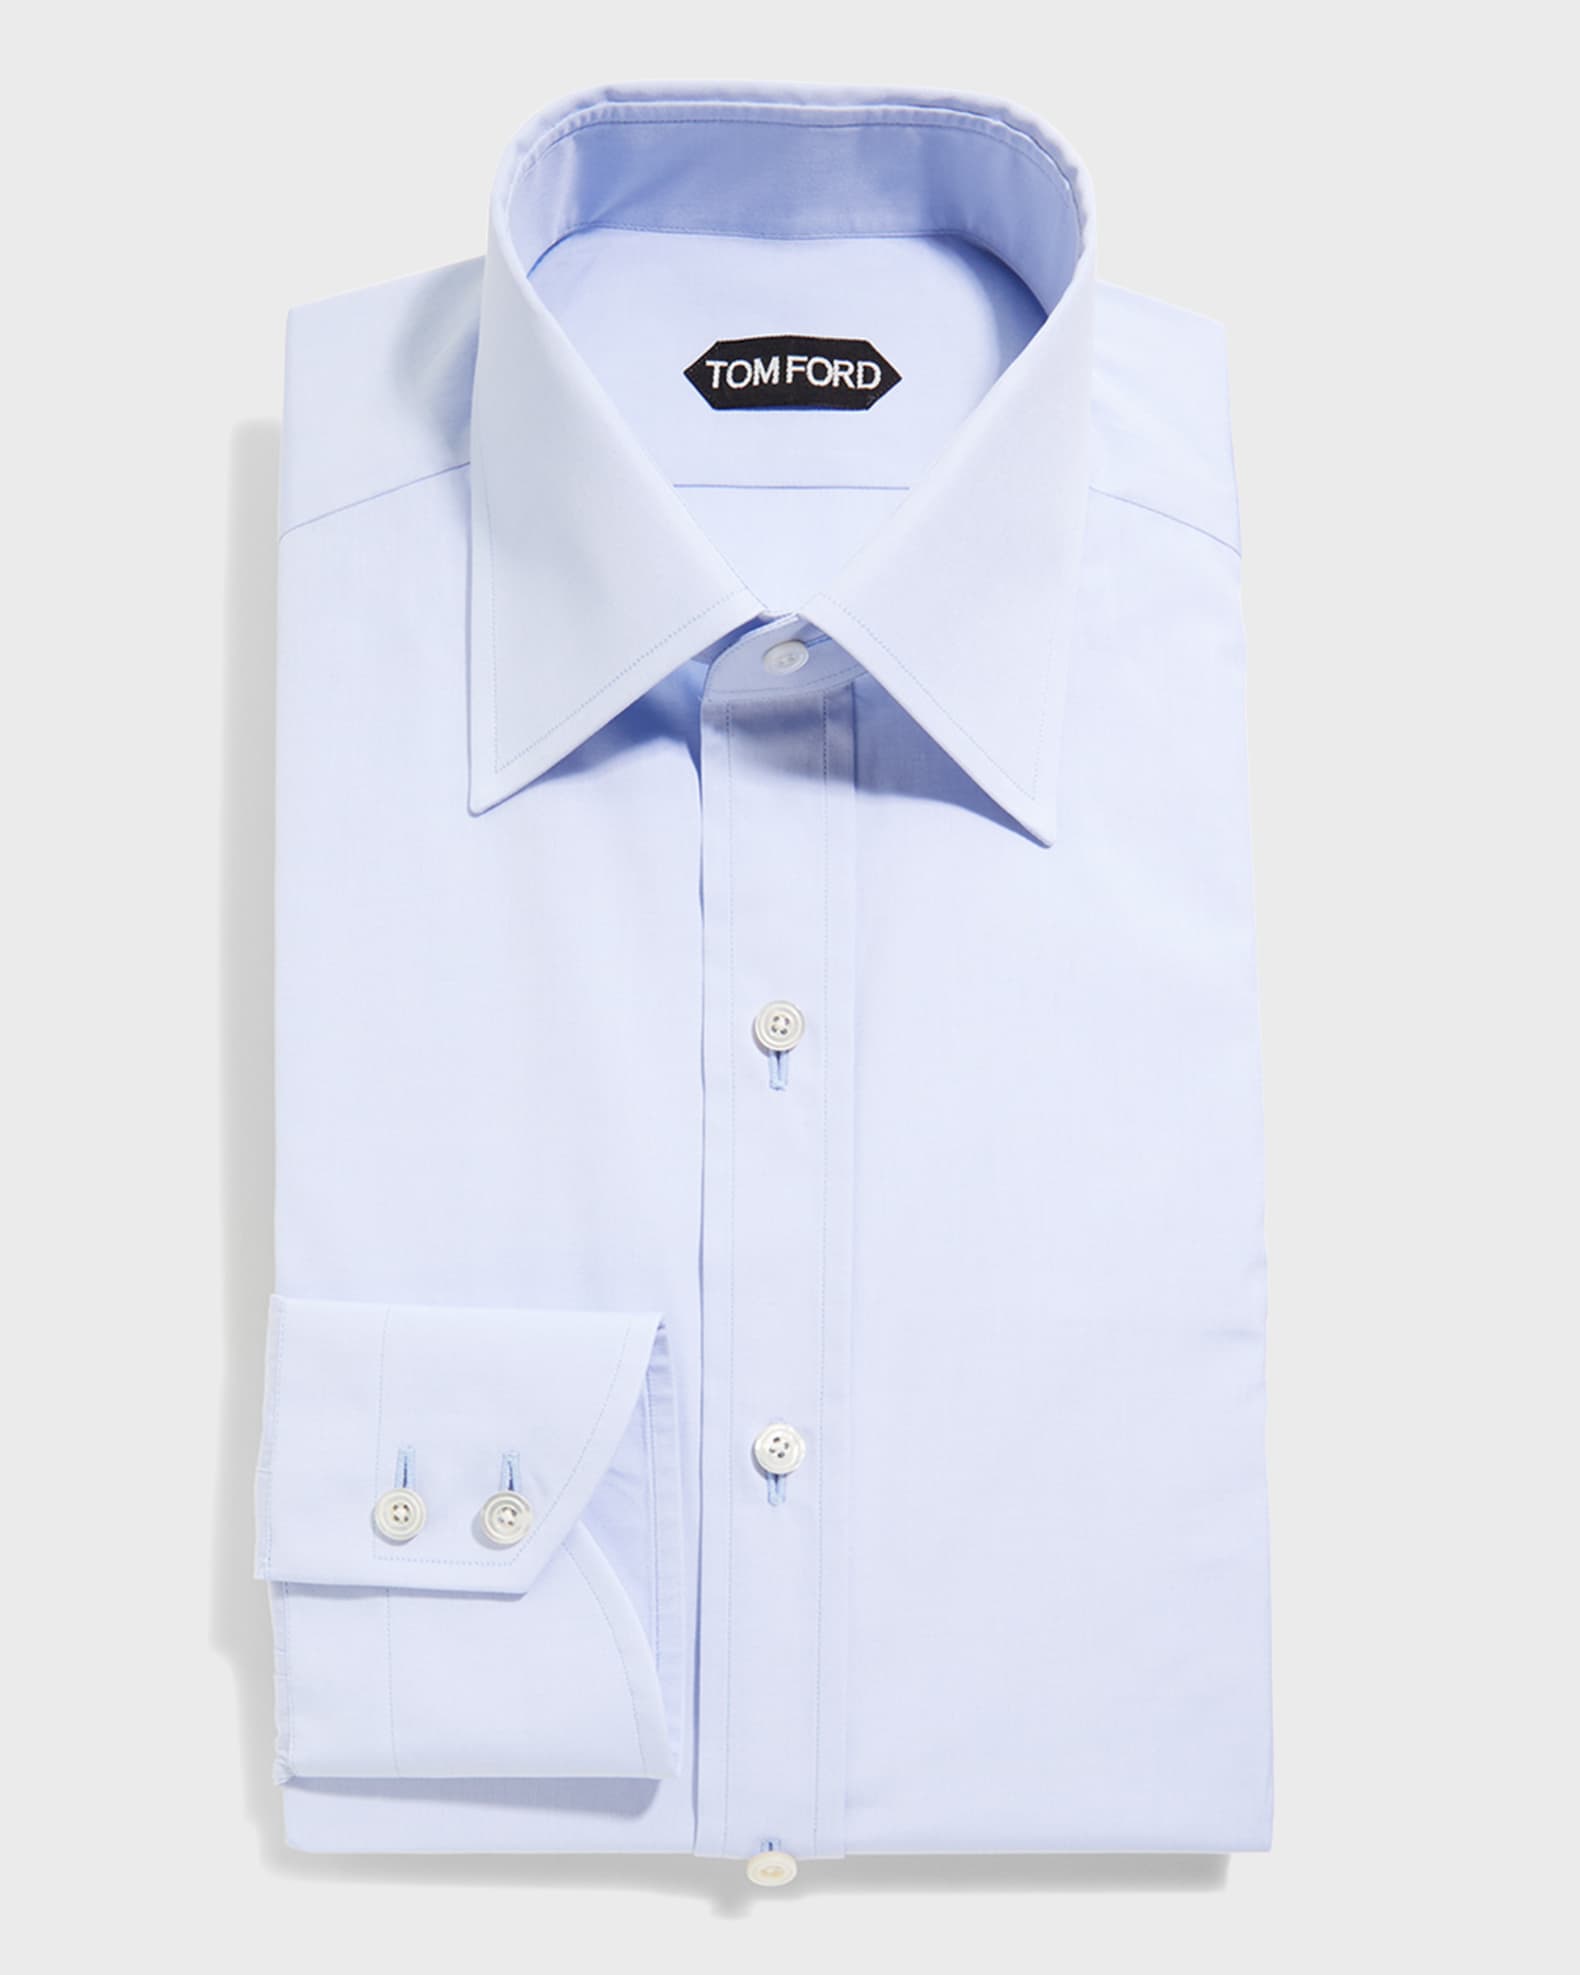 TOM FORD Solid Collar Shirt | Neiman Marcus